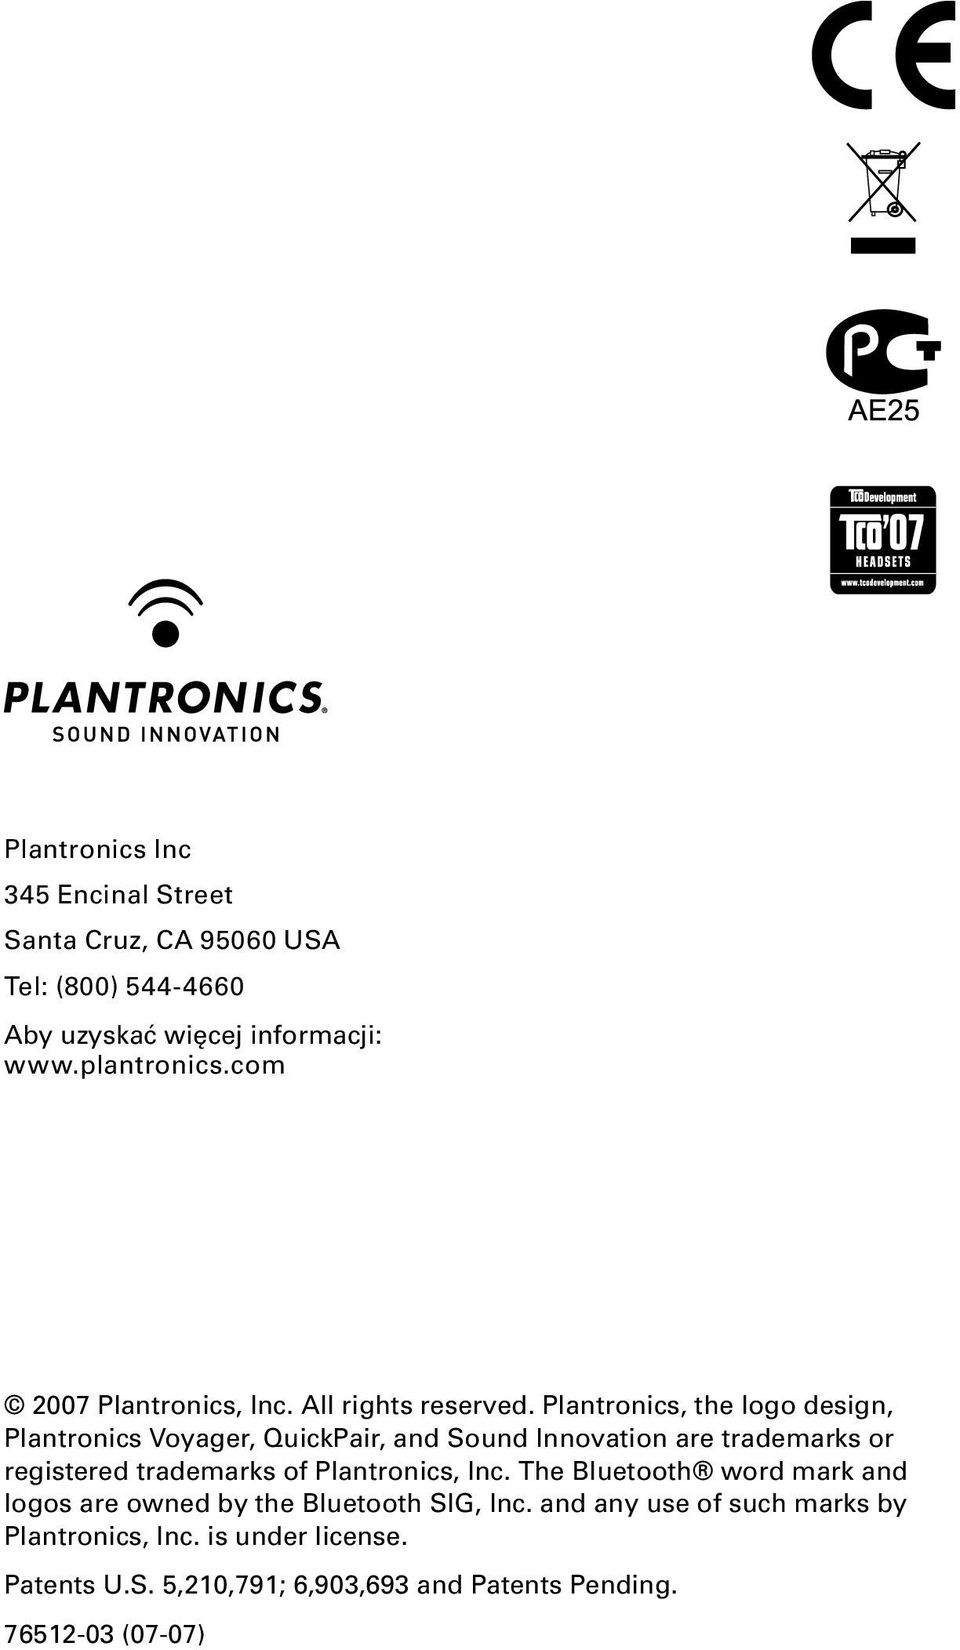 trademarks or registered trademarks of Plantronics, Inc The Bluetooth word mark and logos are owned by the Bluetooth SIG, Inc